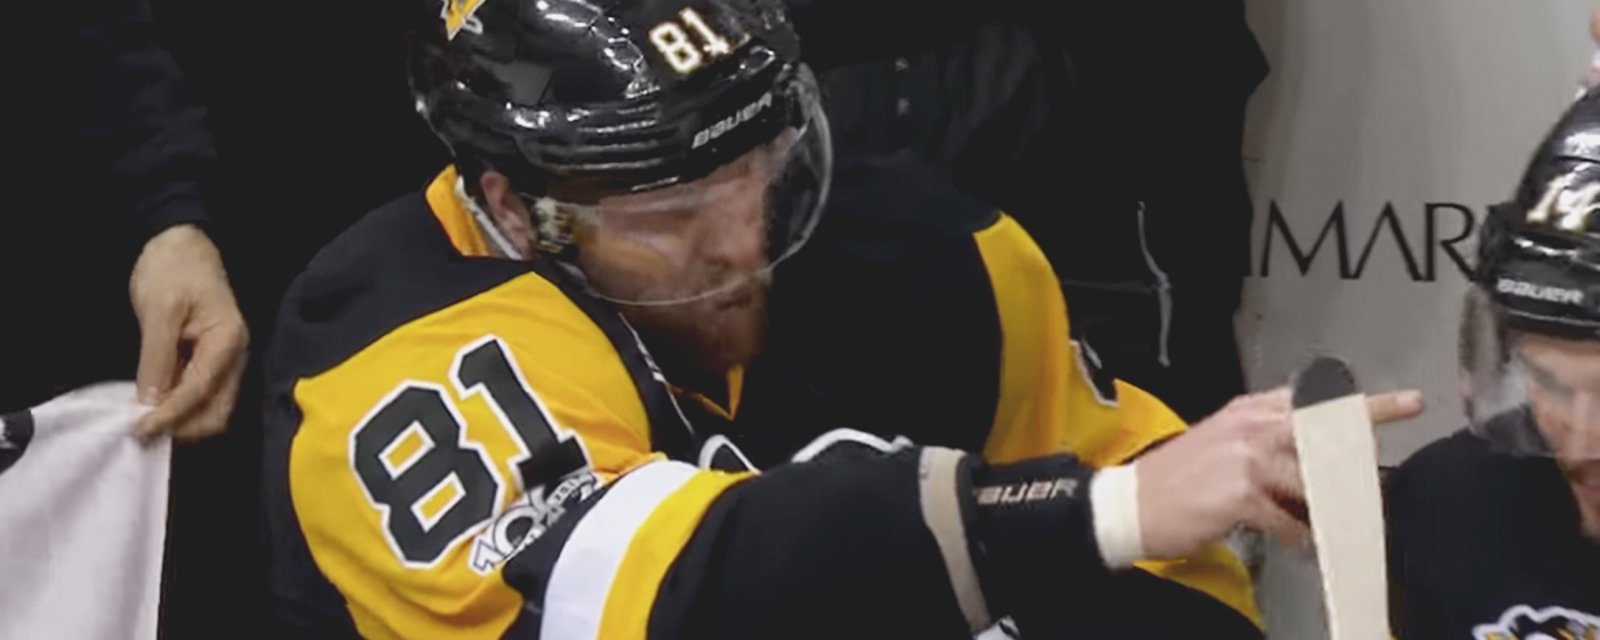 Penguins Head Coach FIRMLY comments on Kessel yelling at teammates on the bench.